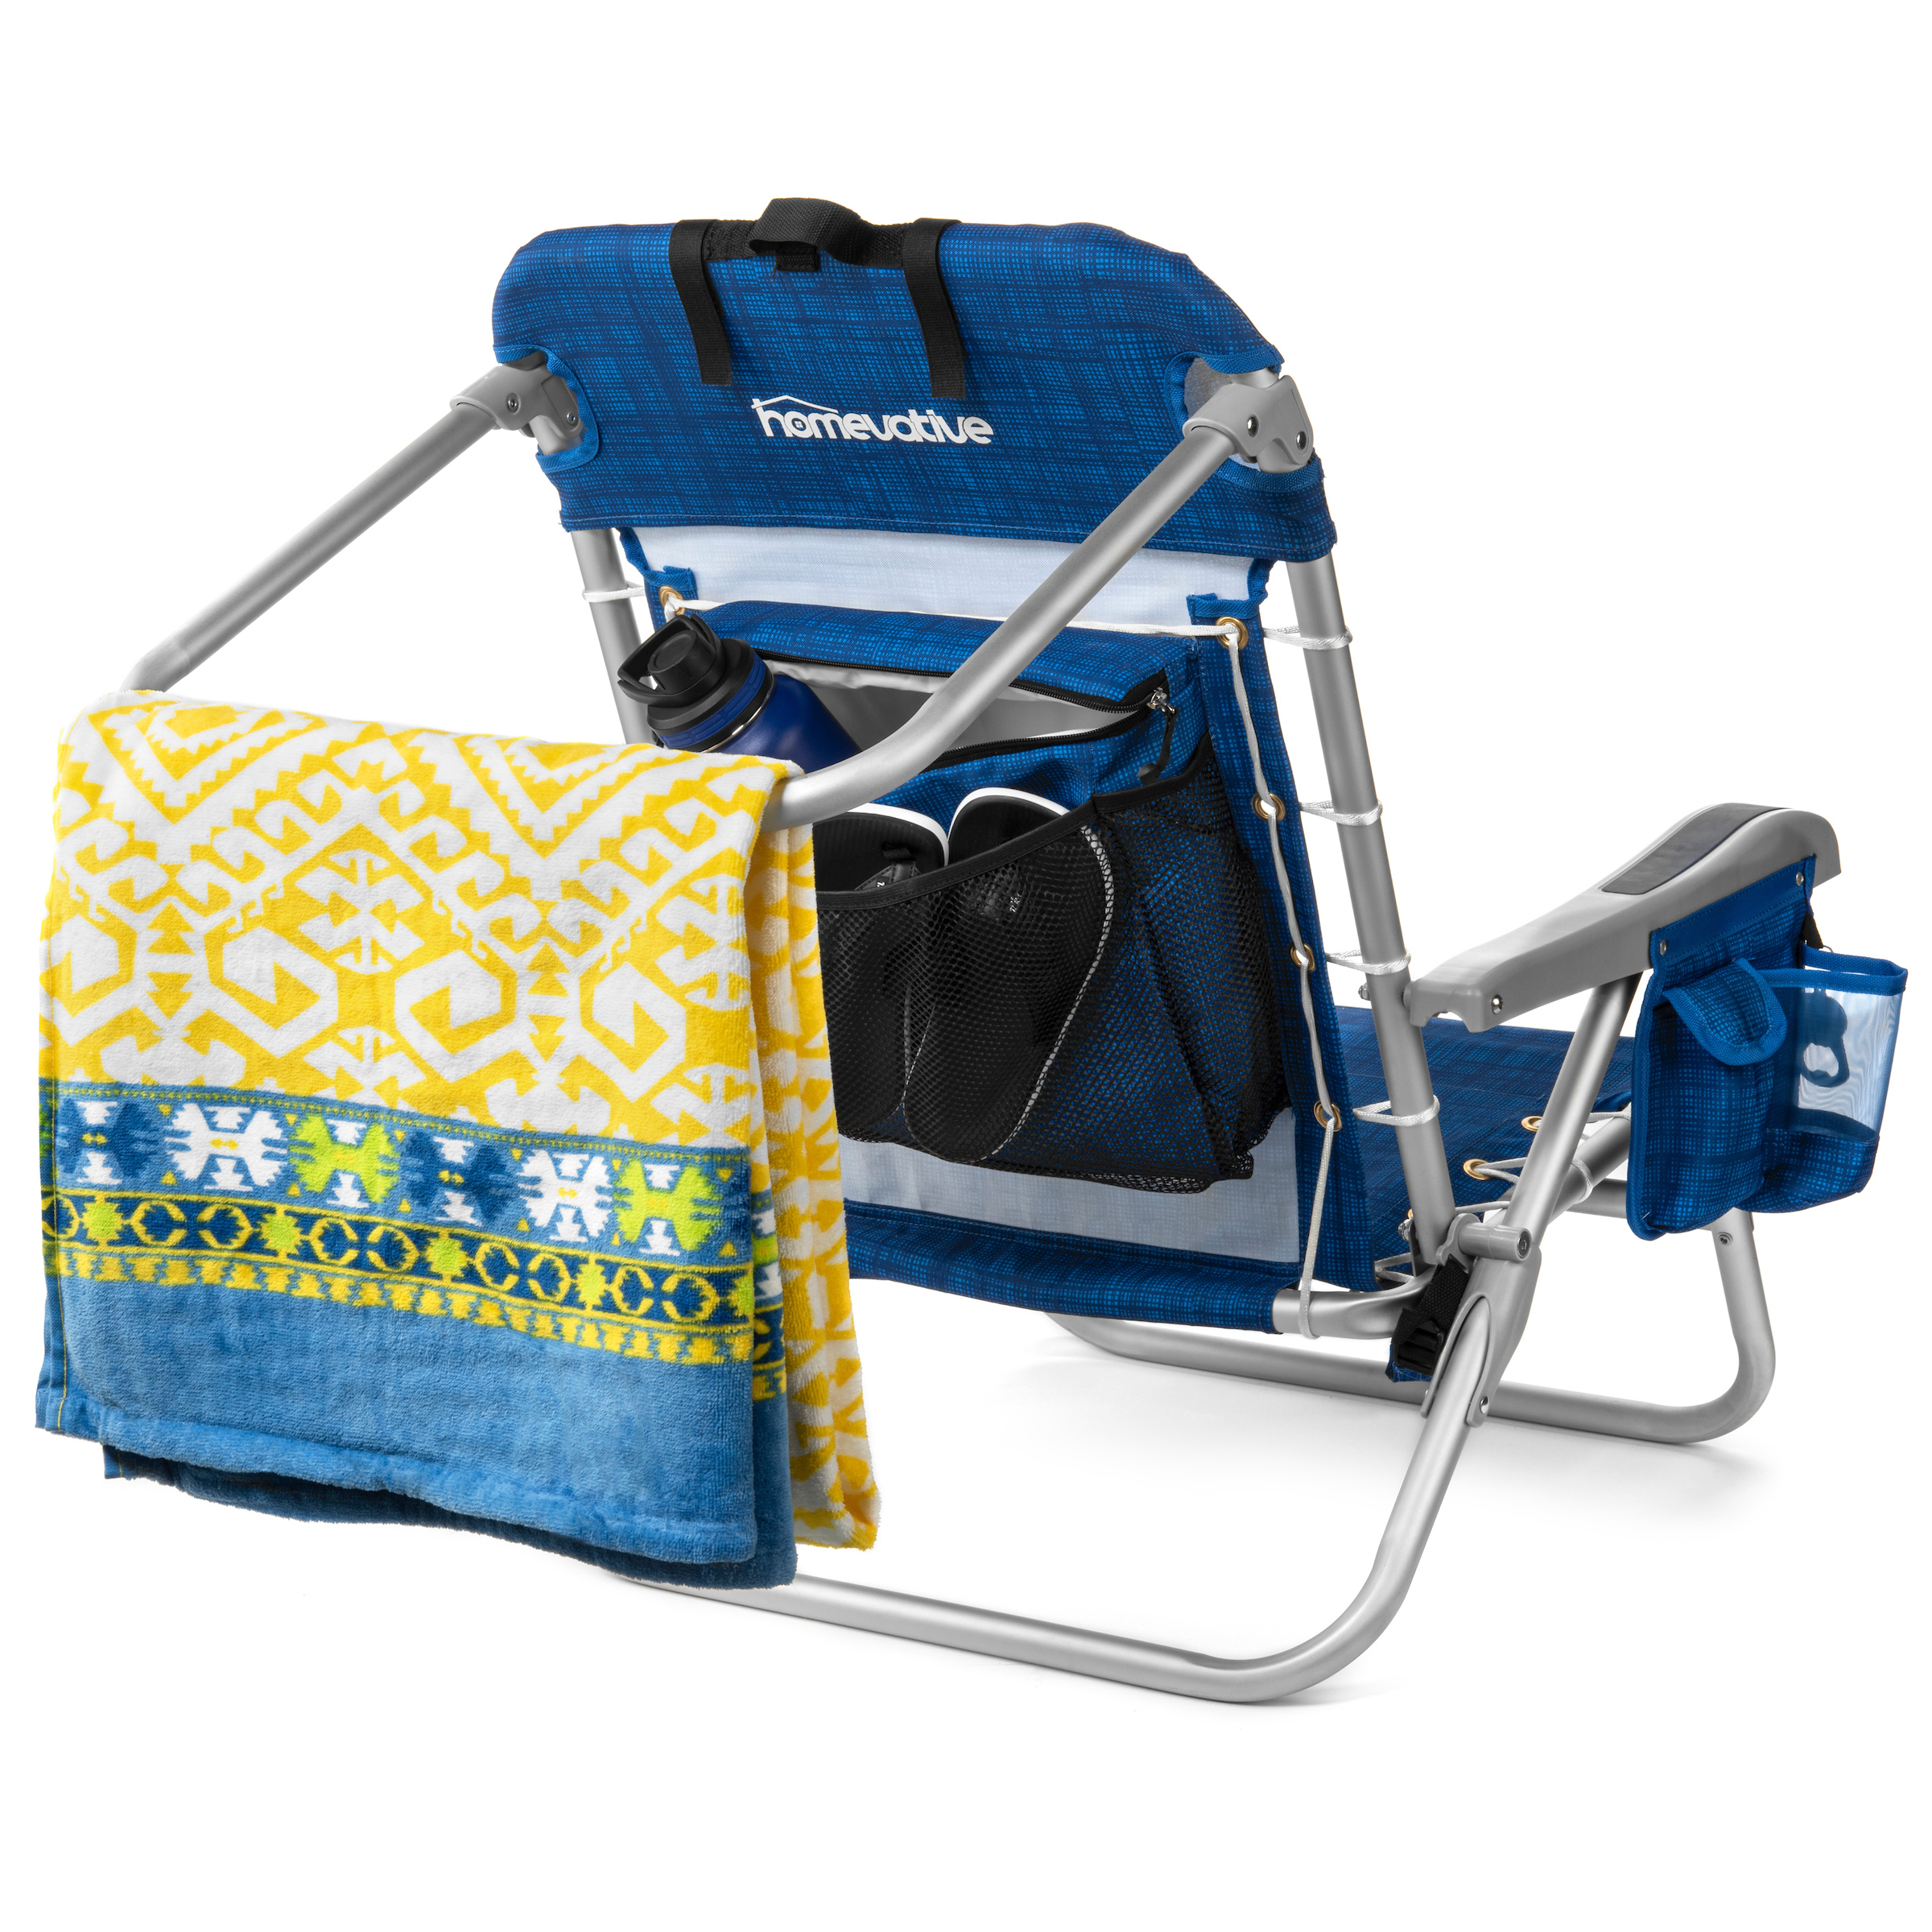 Homevative Cooler+ Folding Backpack Beach Chair with Positions, Towel bar,  XL Cooler Pouch, Storage Net, Cup and Phone